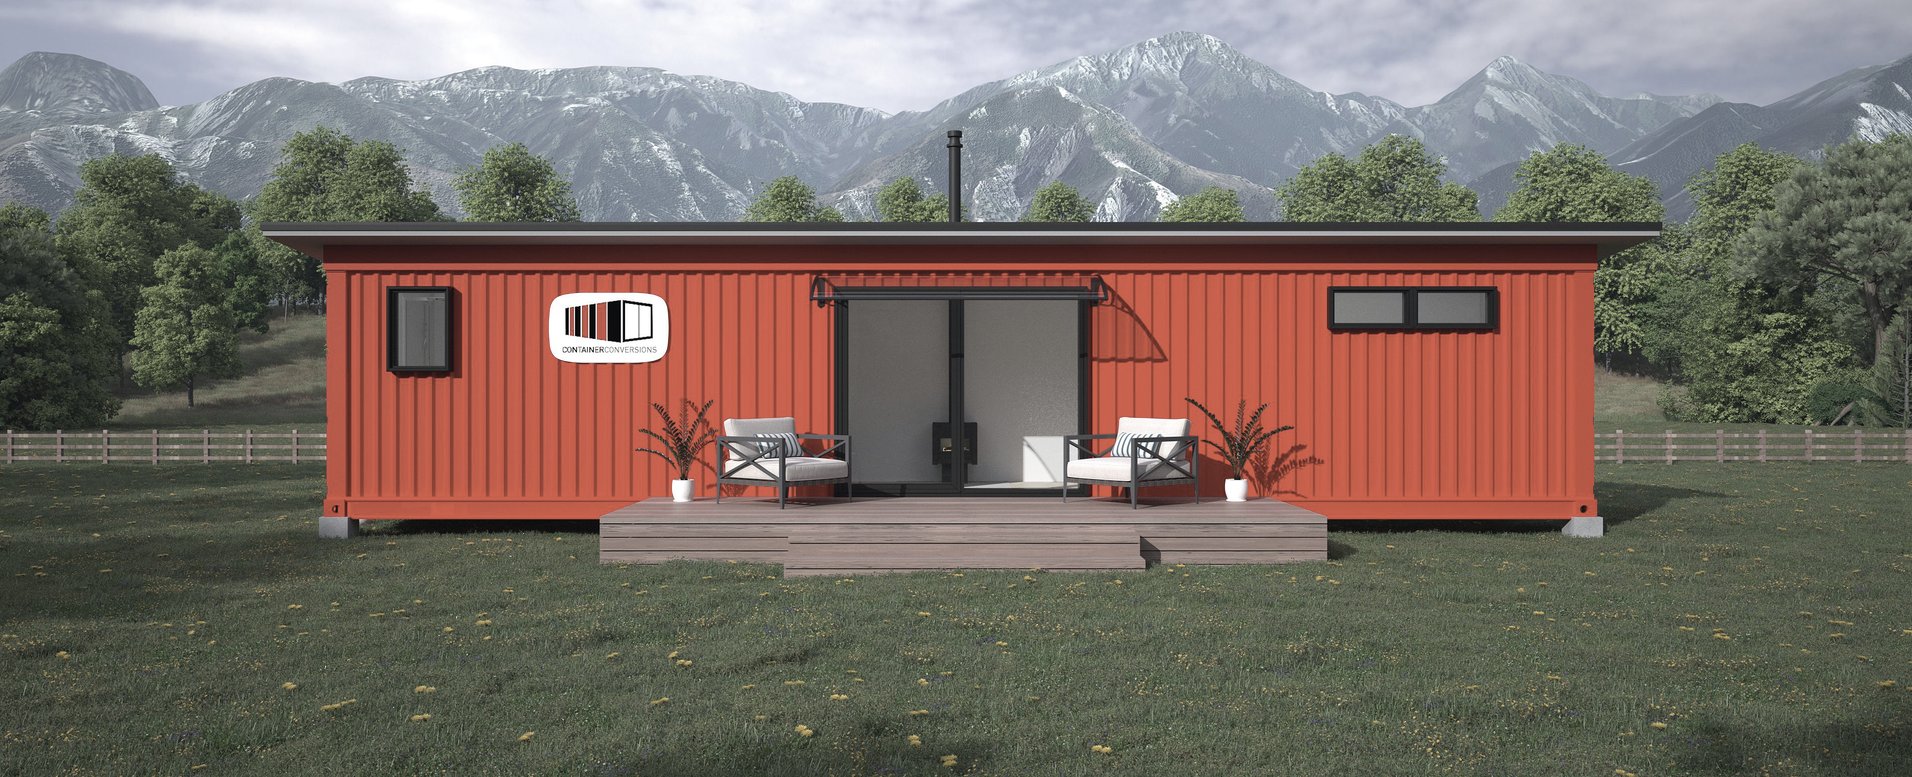 Container Conversions by 3DAV | ArchiPro NZ